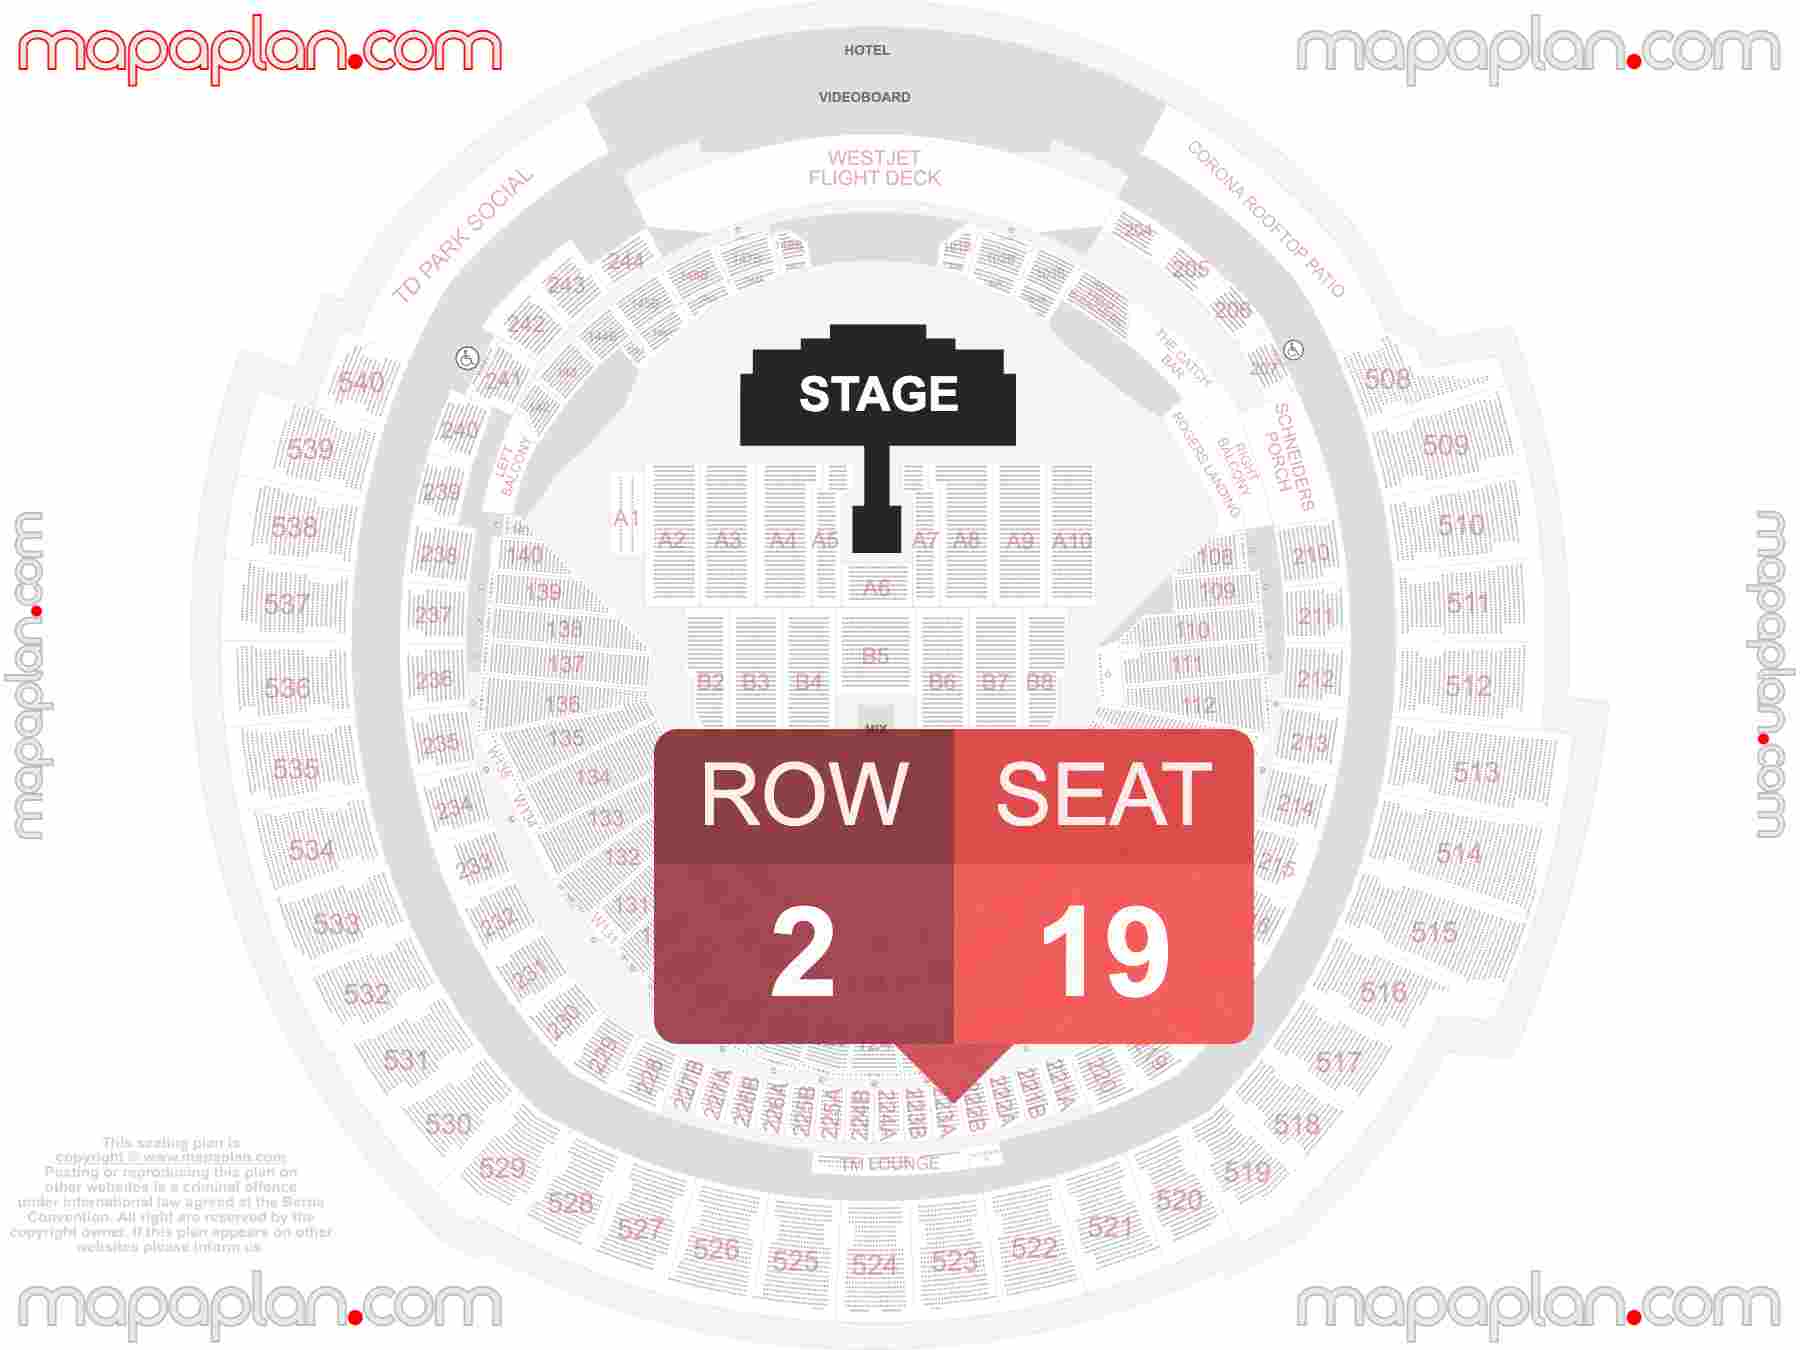 Toronto Rogers Centre seating map Concert with B-stage find best seats row numbering system chart showing how many seats per row - Individual 'find my seat' virtual locator